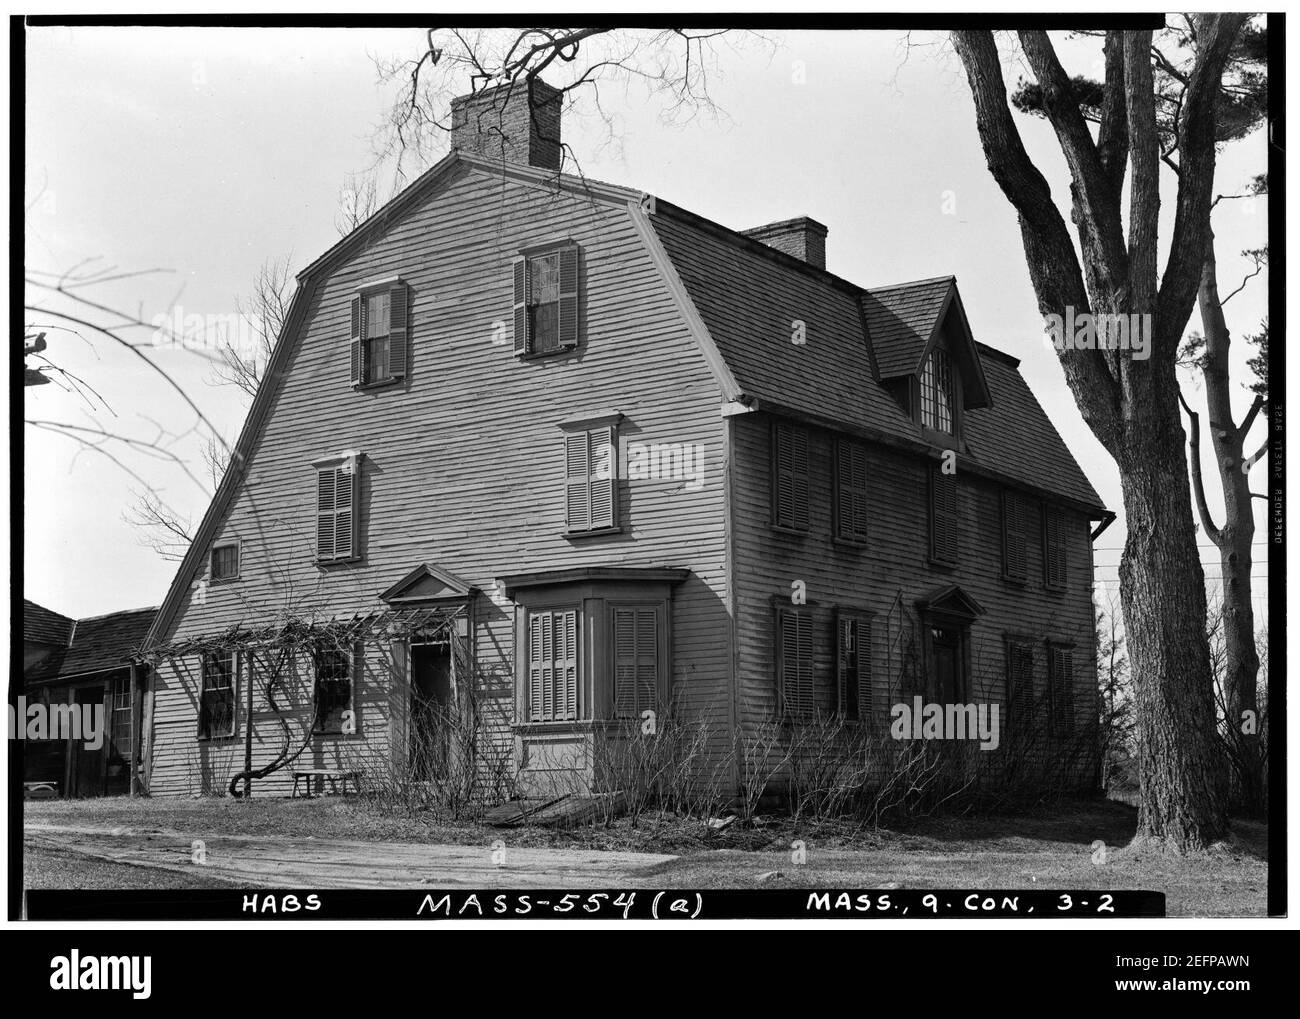 Old Manse, Concord MA - HABS 080255pu. Stock Photo